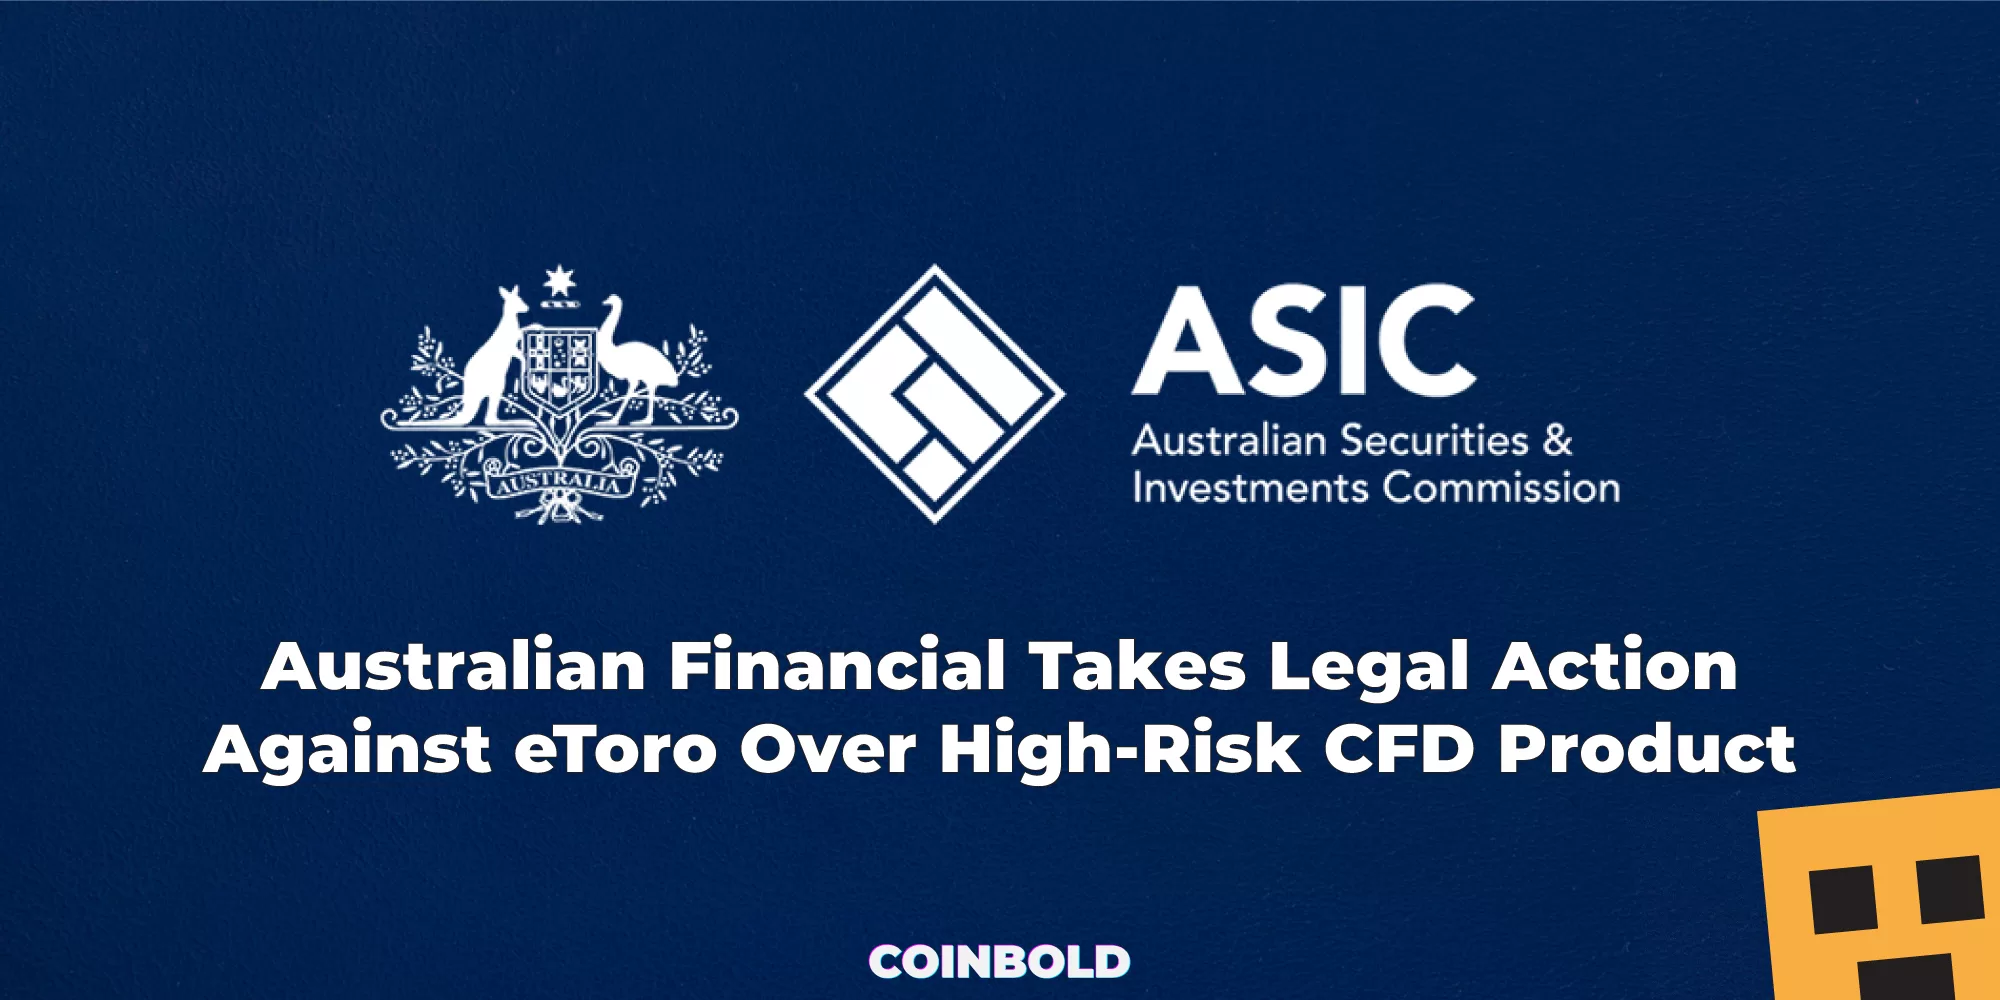 Australian Financial Takes Legal Action Against eToro Over High-Risk CFD Product